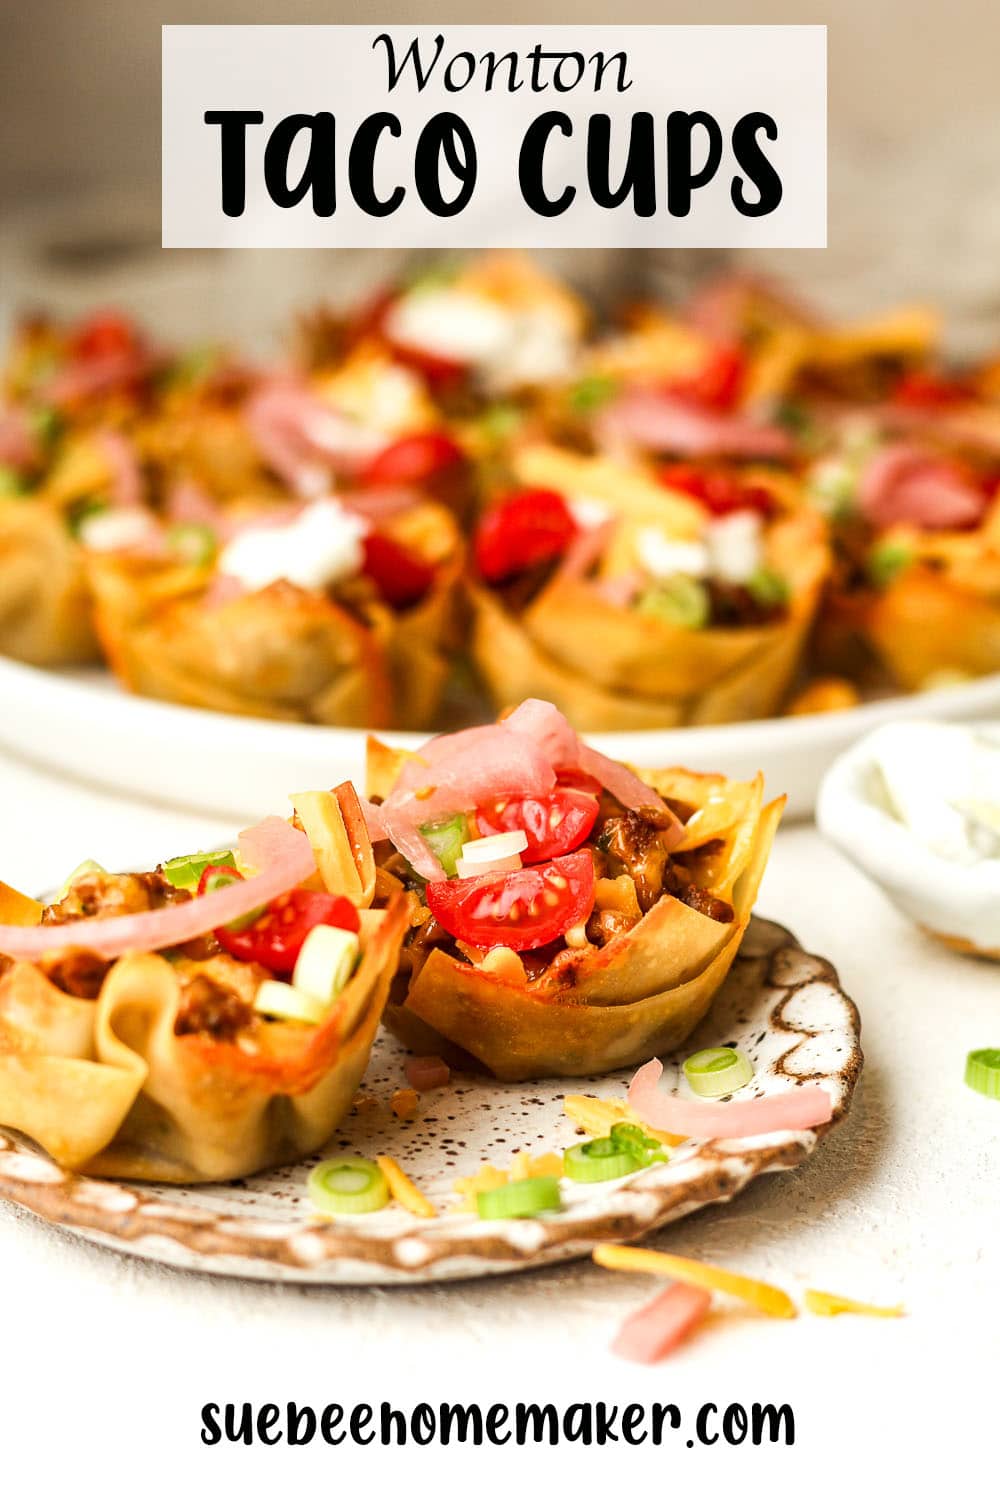 A small plate of wonton taco cups in front of another plate.